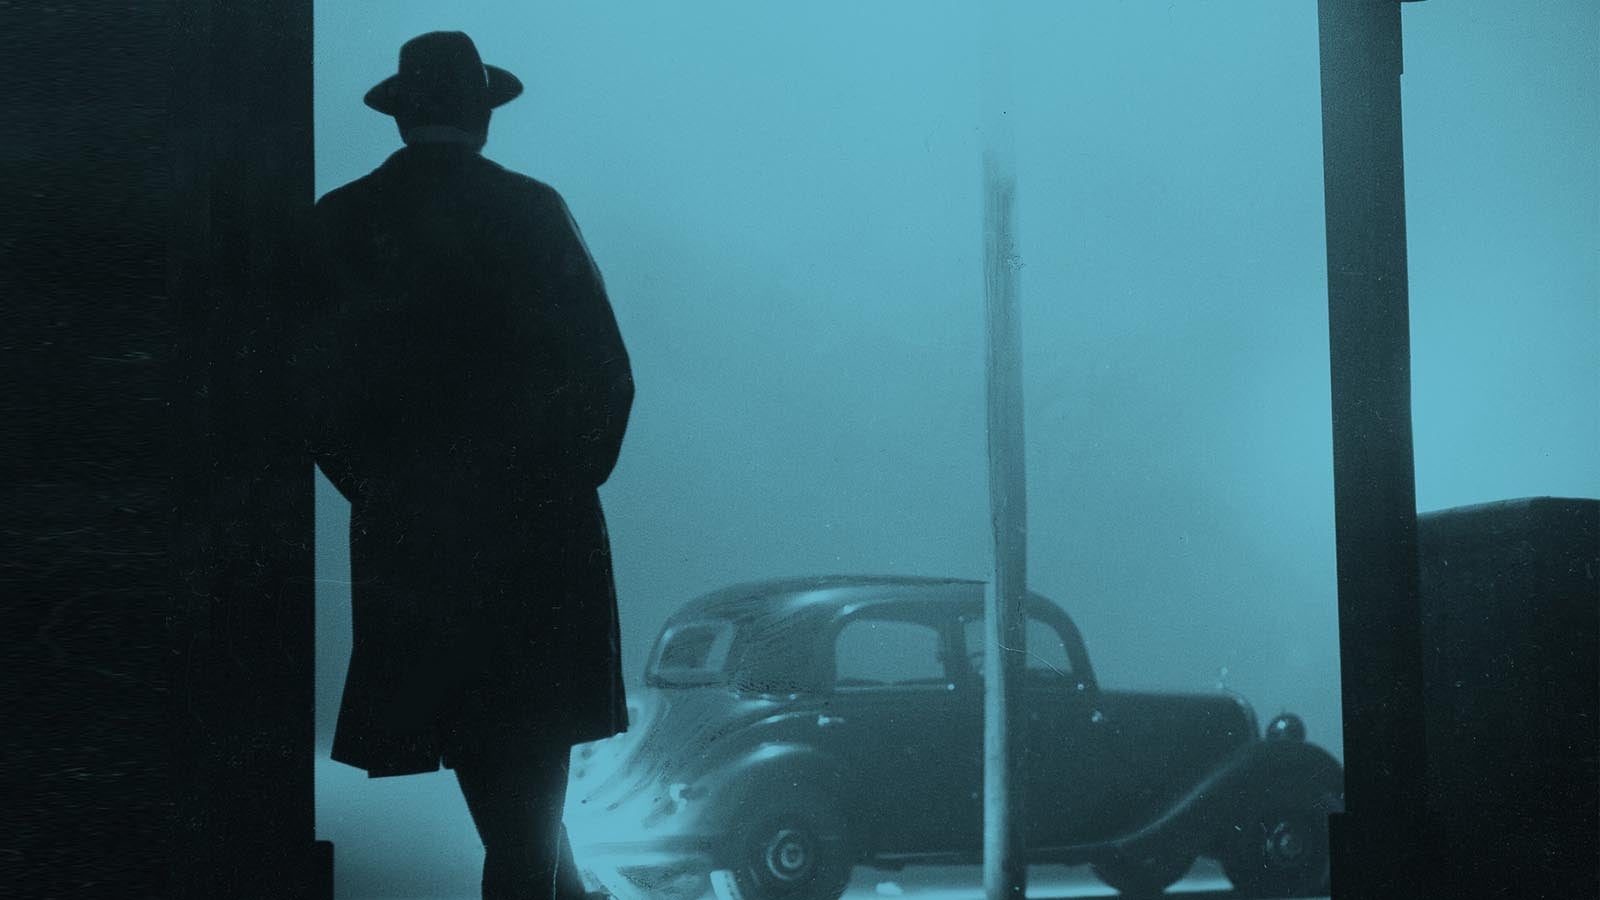 Silhouette of a man in the 1950s , wearing a wide-brimmed hat and looking out toward an old car on a misty evening